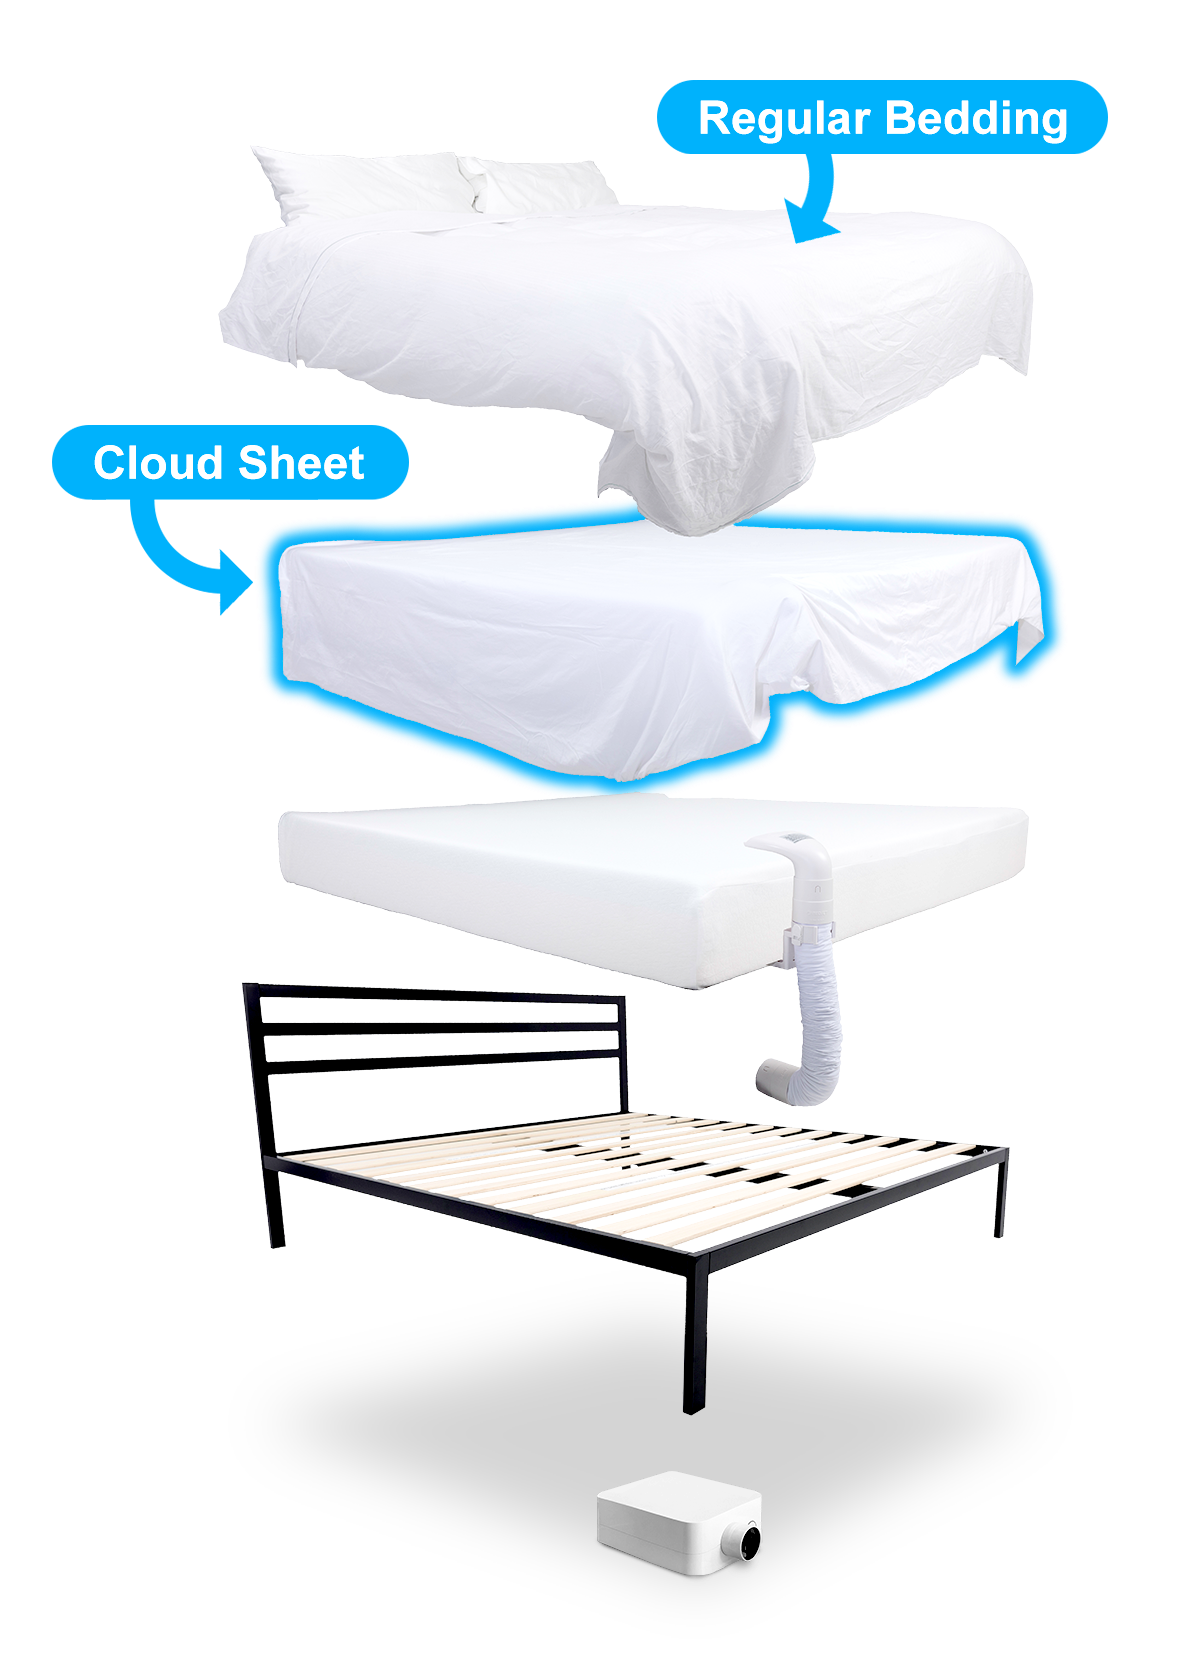 The Cloud Sheet replaces your existing top sheet